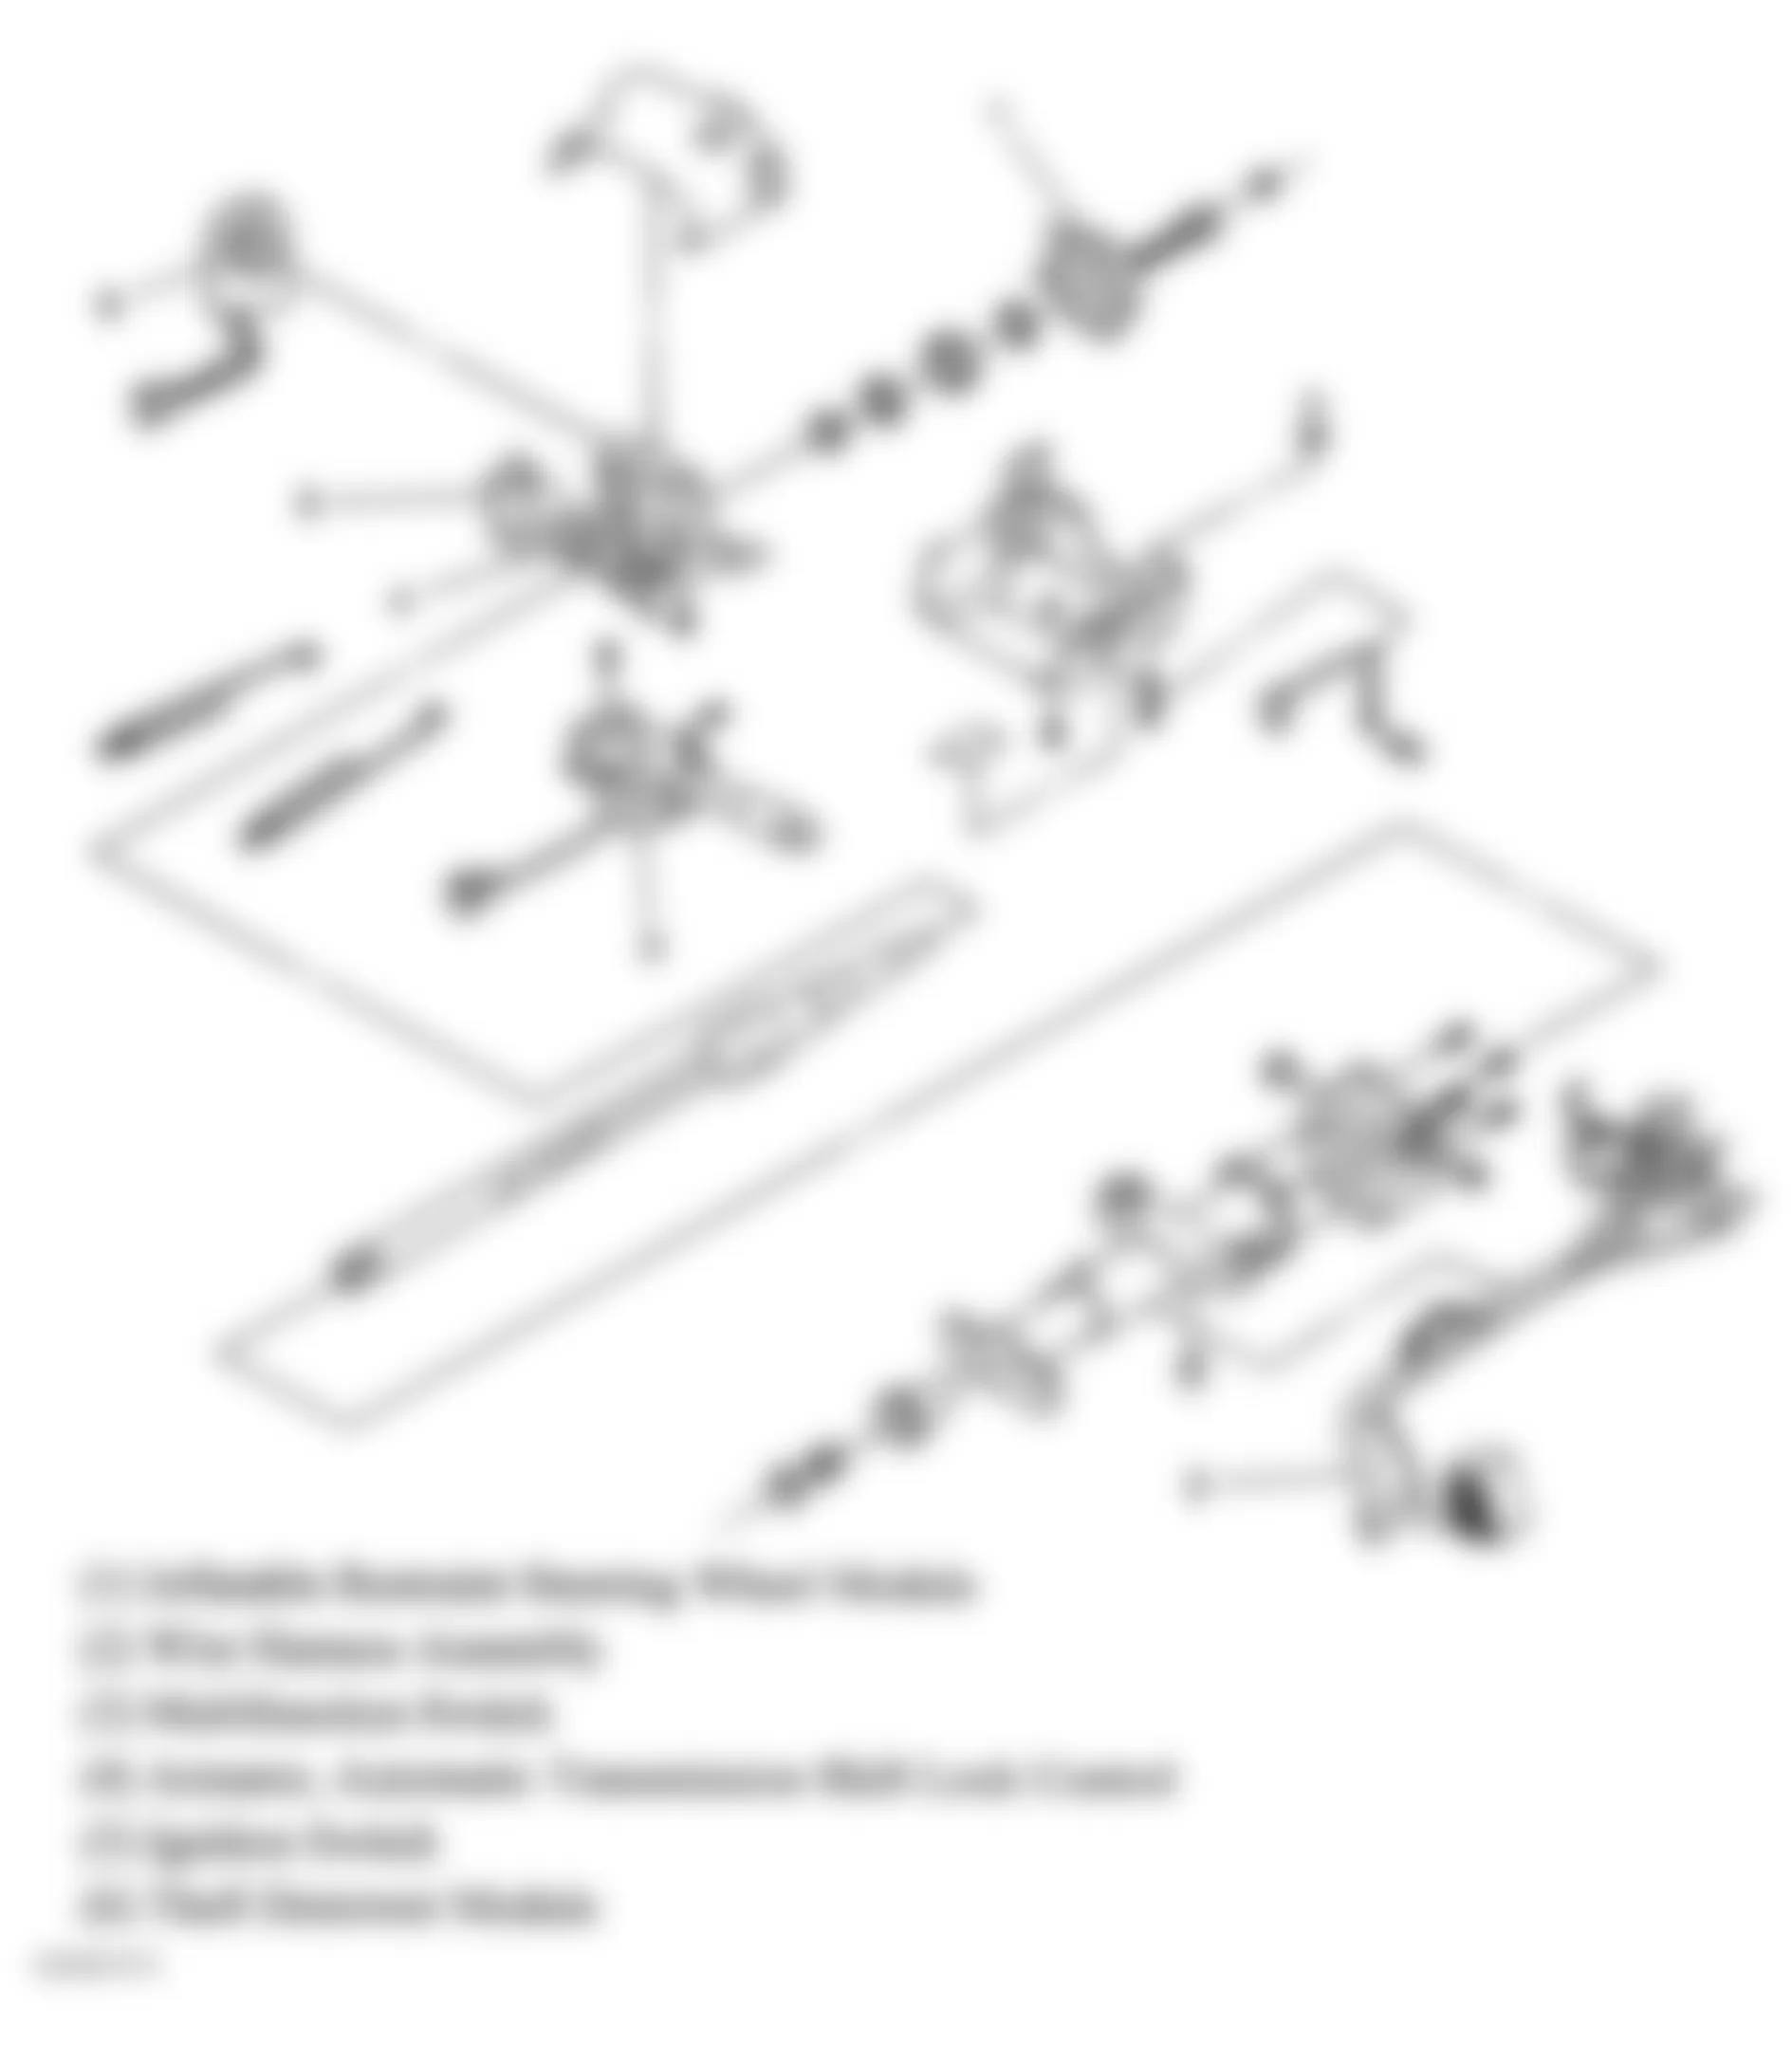 Buick Rendezvous CXL 2005 - Component Locations -  Steering Column Disassembled View (Pontiac)